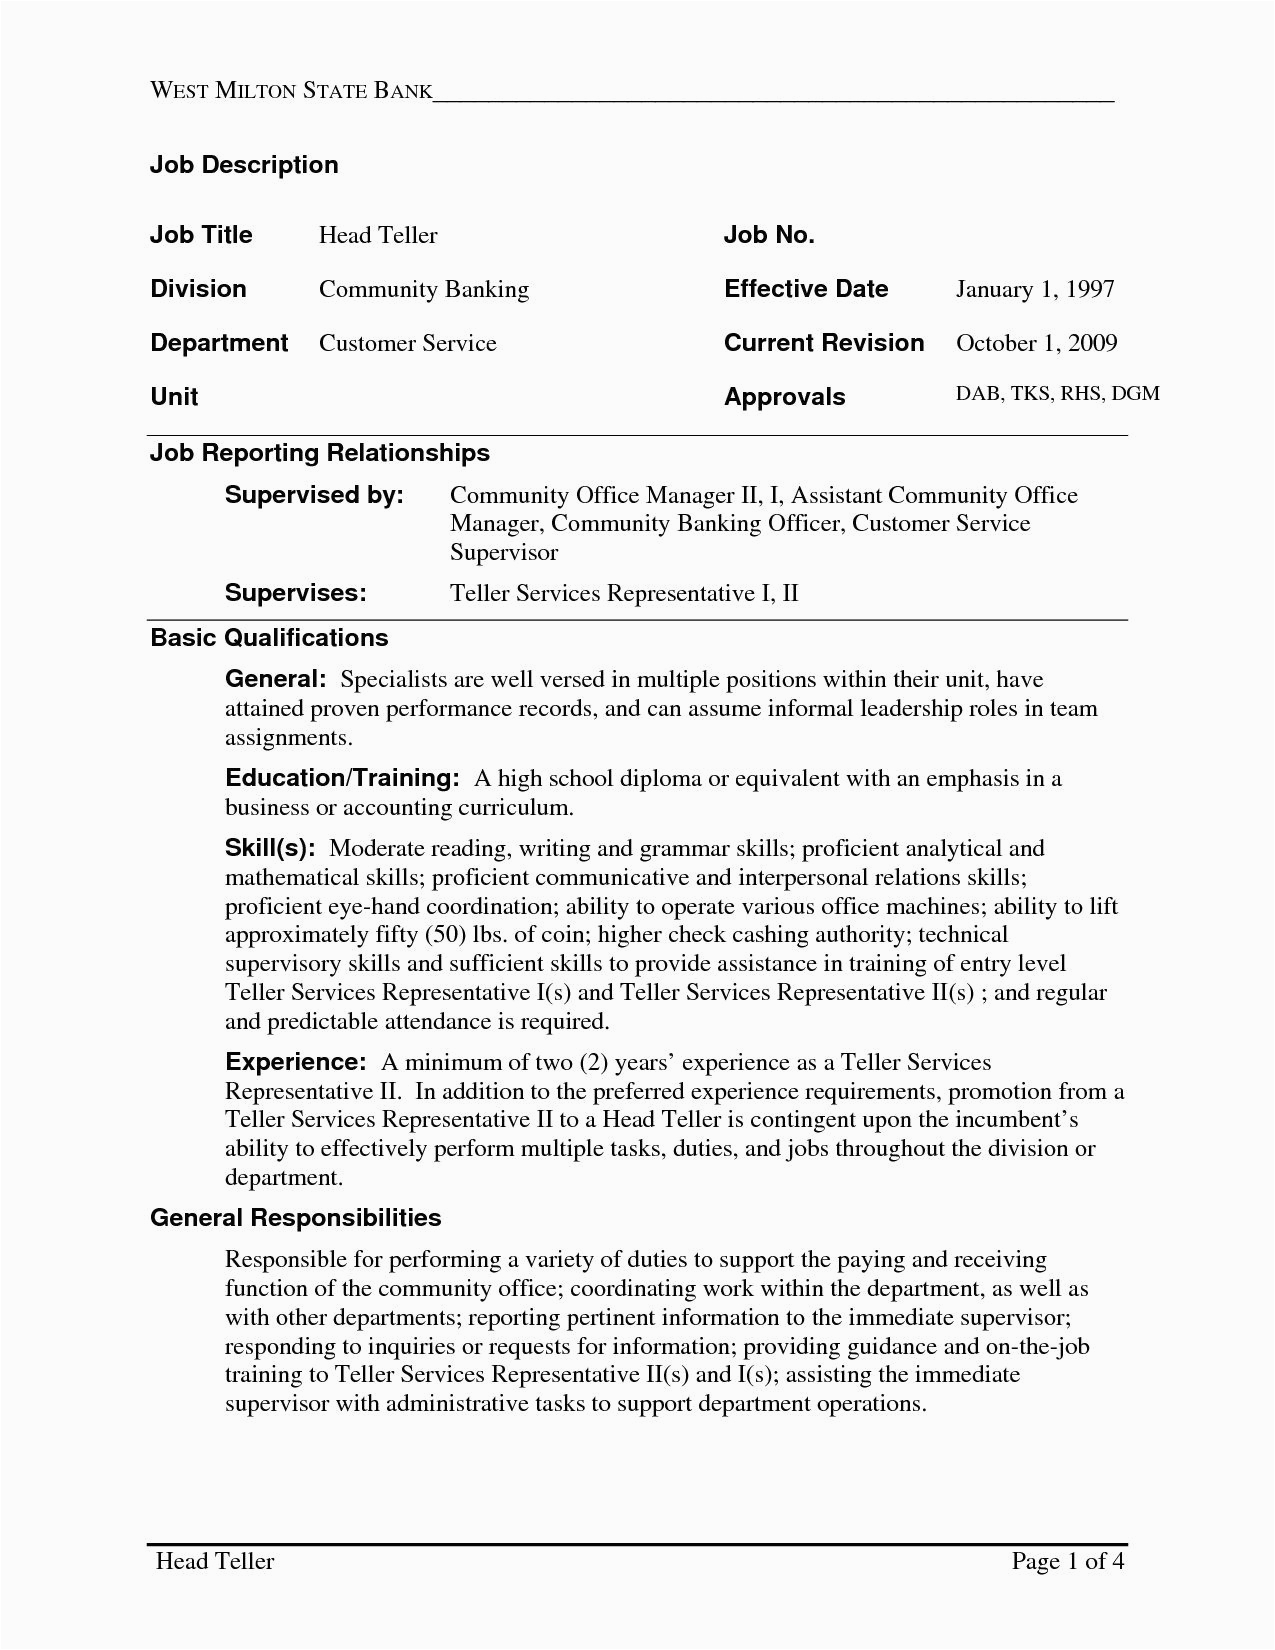 Sample Resume for Bank Jobs with No Experience Bank Teller Resume with No Experience topresume